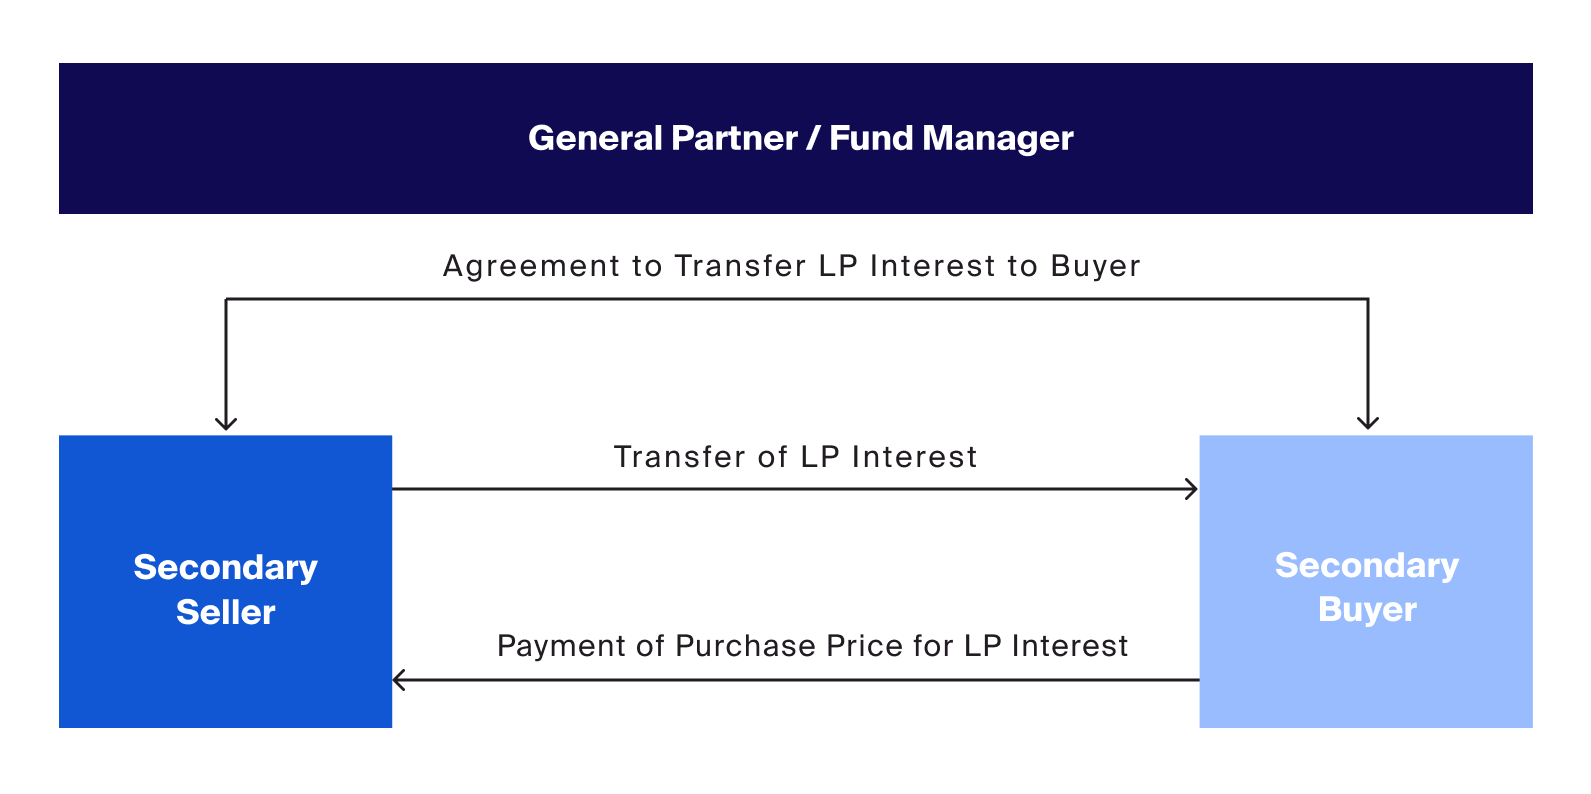 Exhibit 1: A standard secondary market private equity transaction